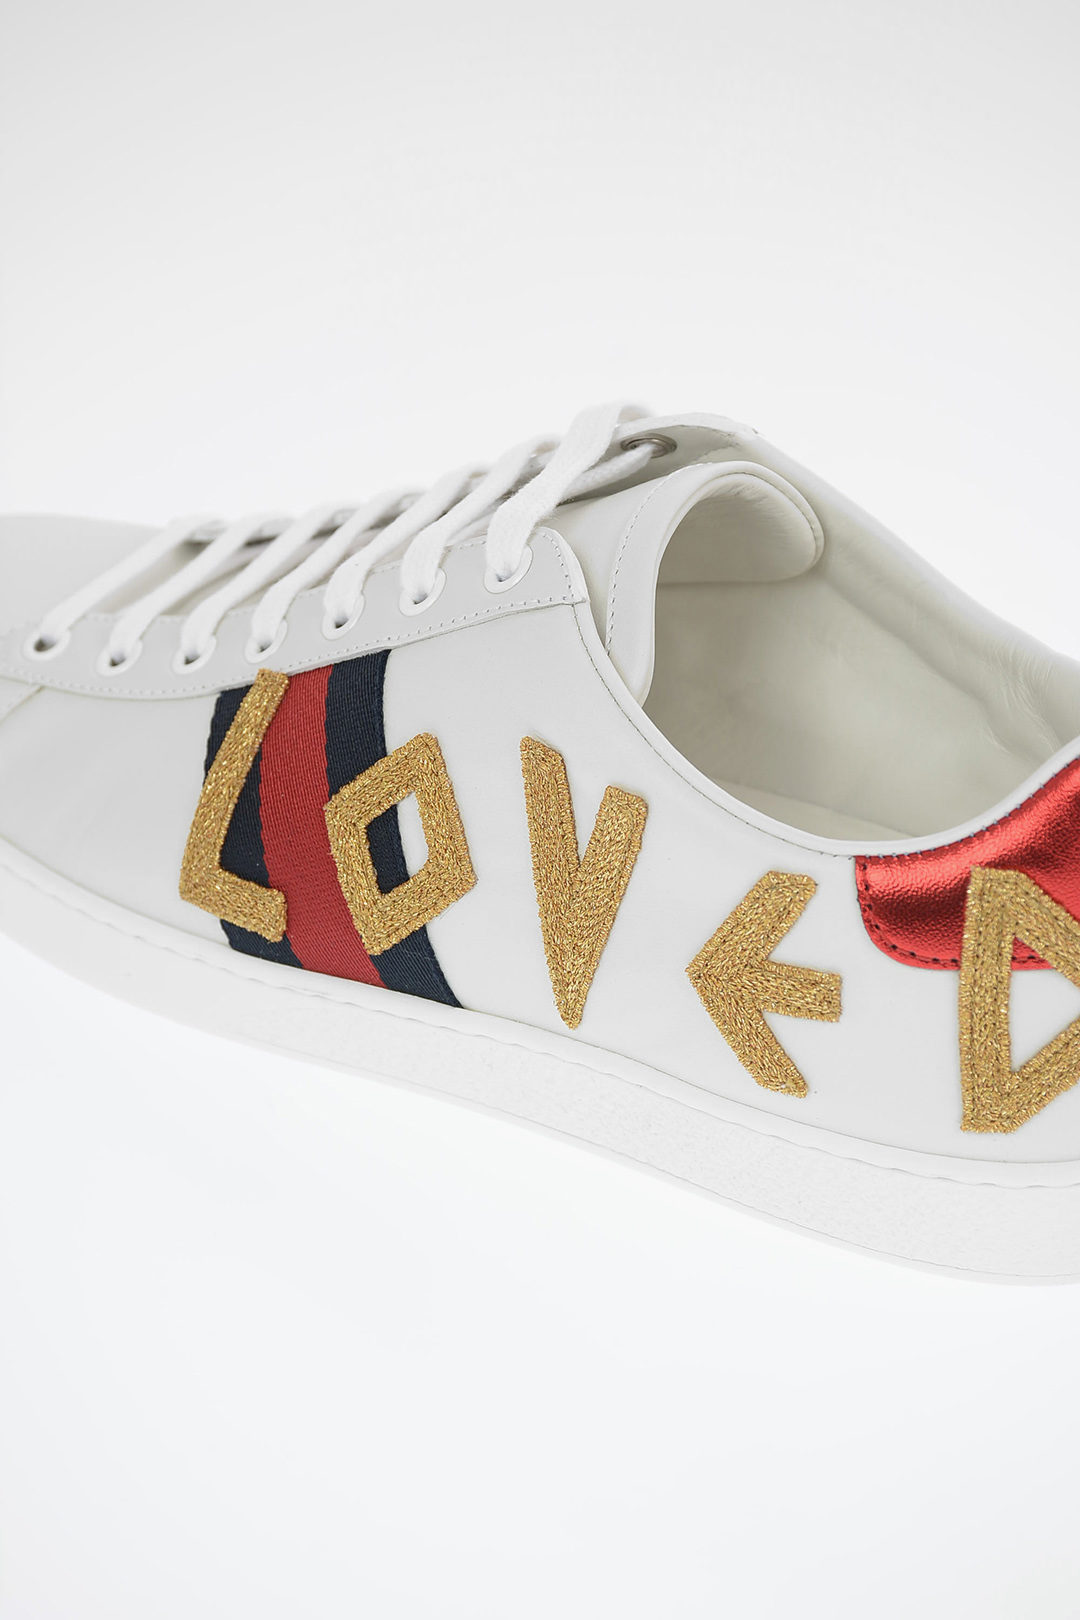 Gucci Leather Embroidered LOVED Sneakers women - Glamood Outlet